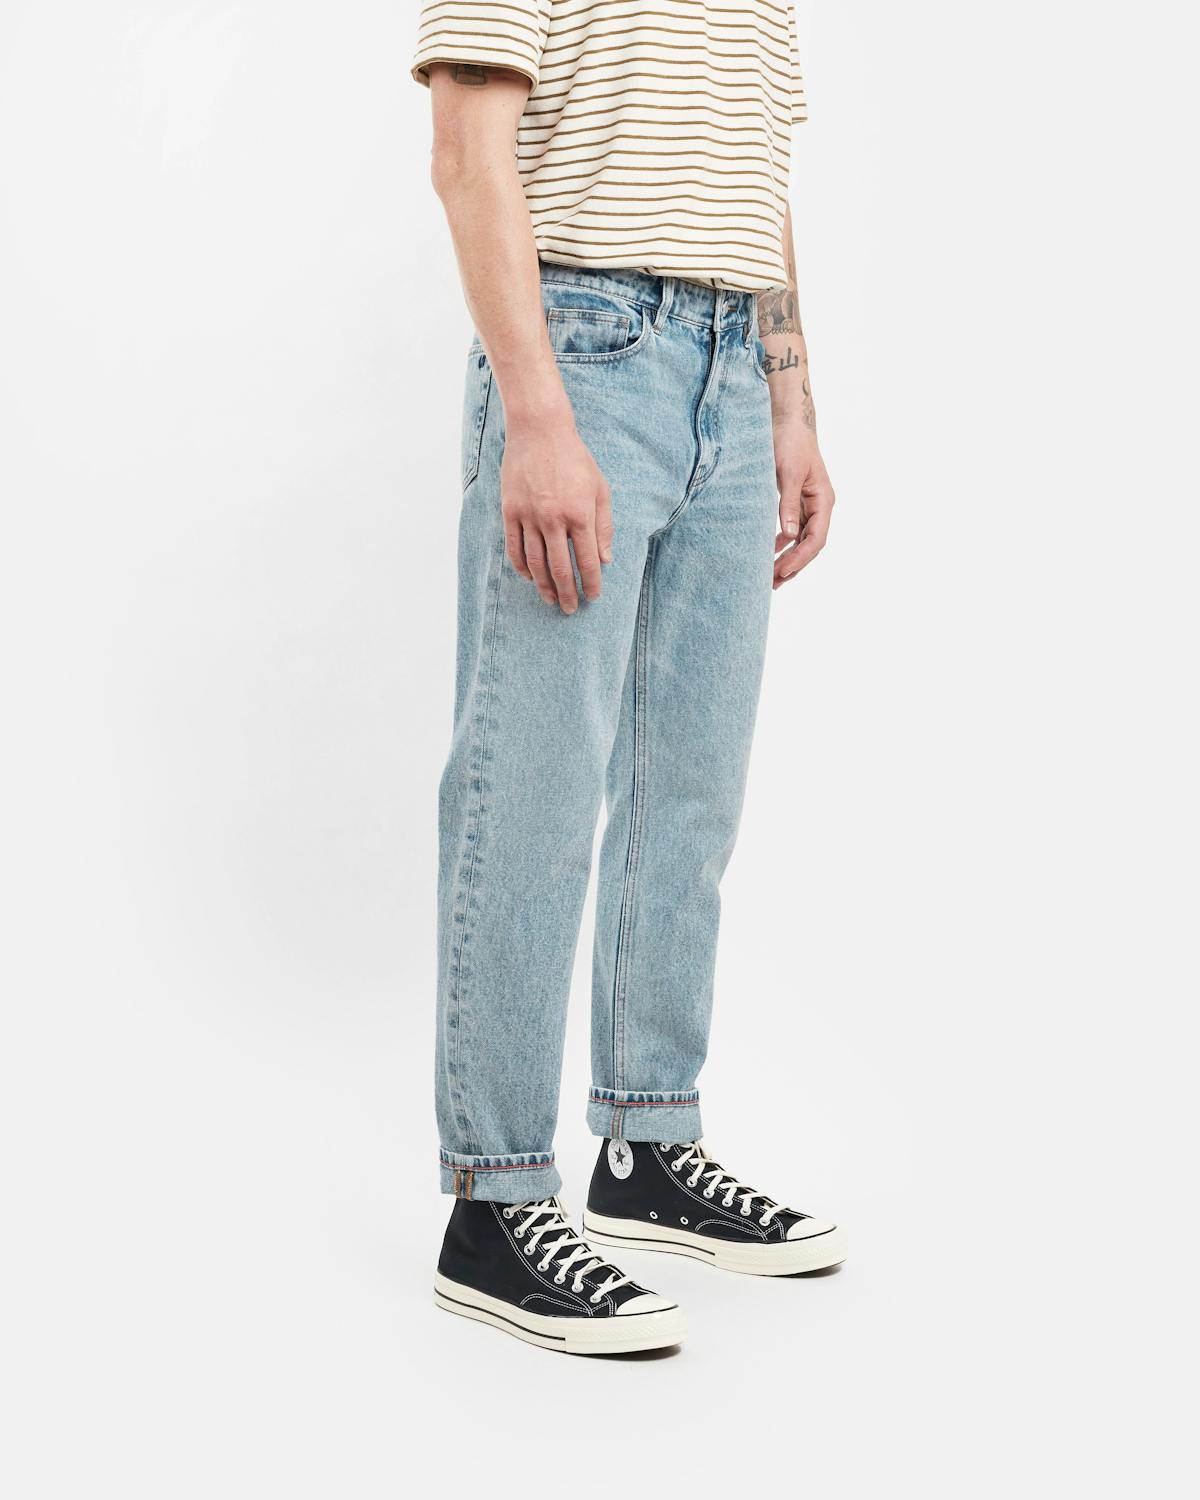 relaxed tapered fit jeans in organic light vintage - unspun custom denim